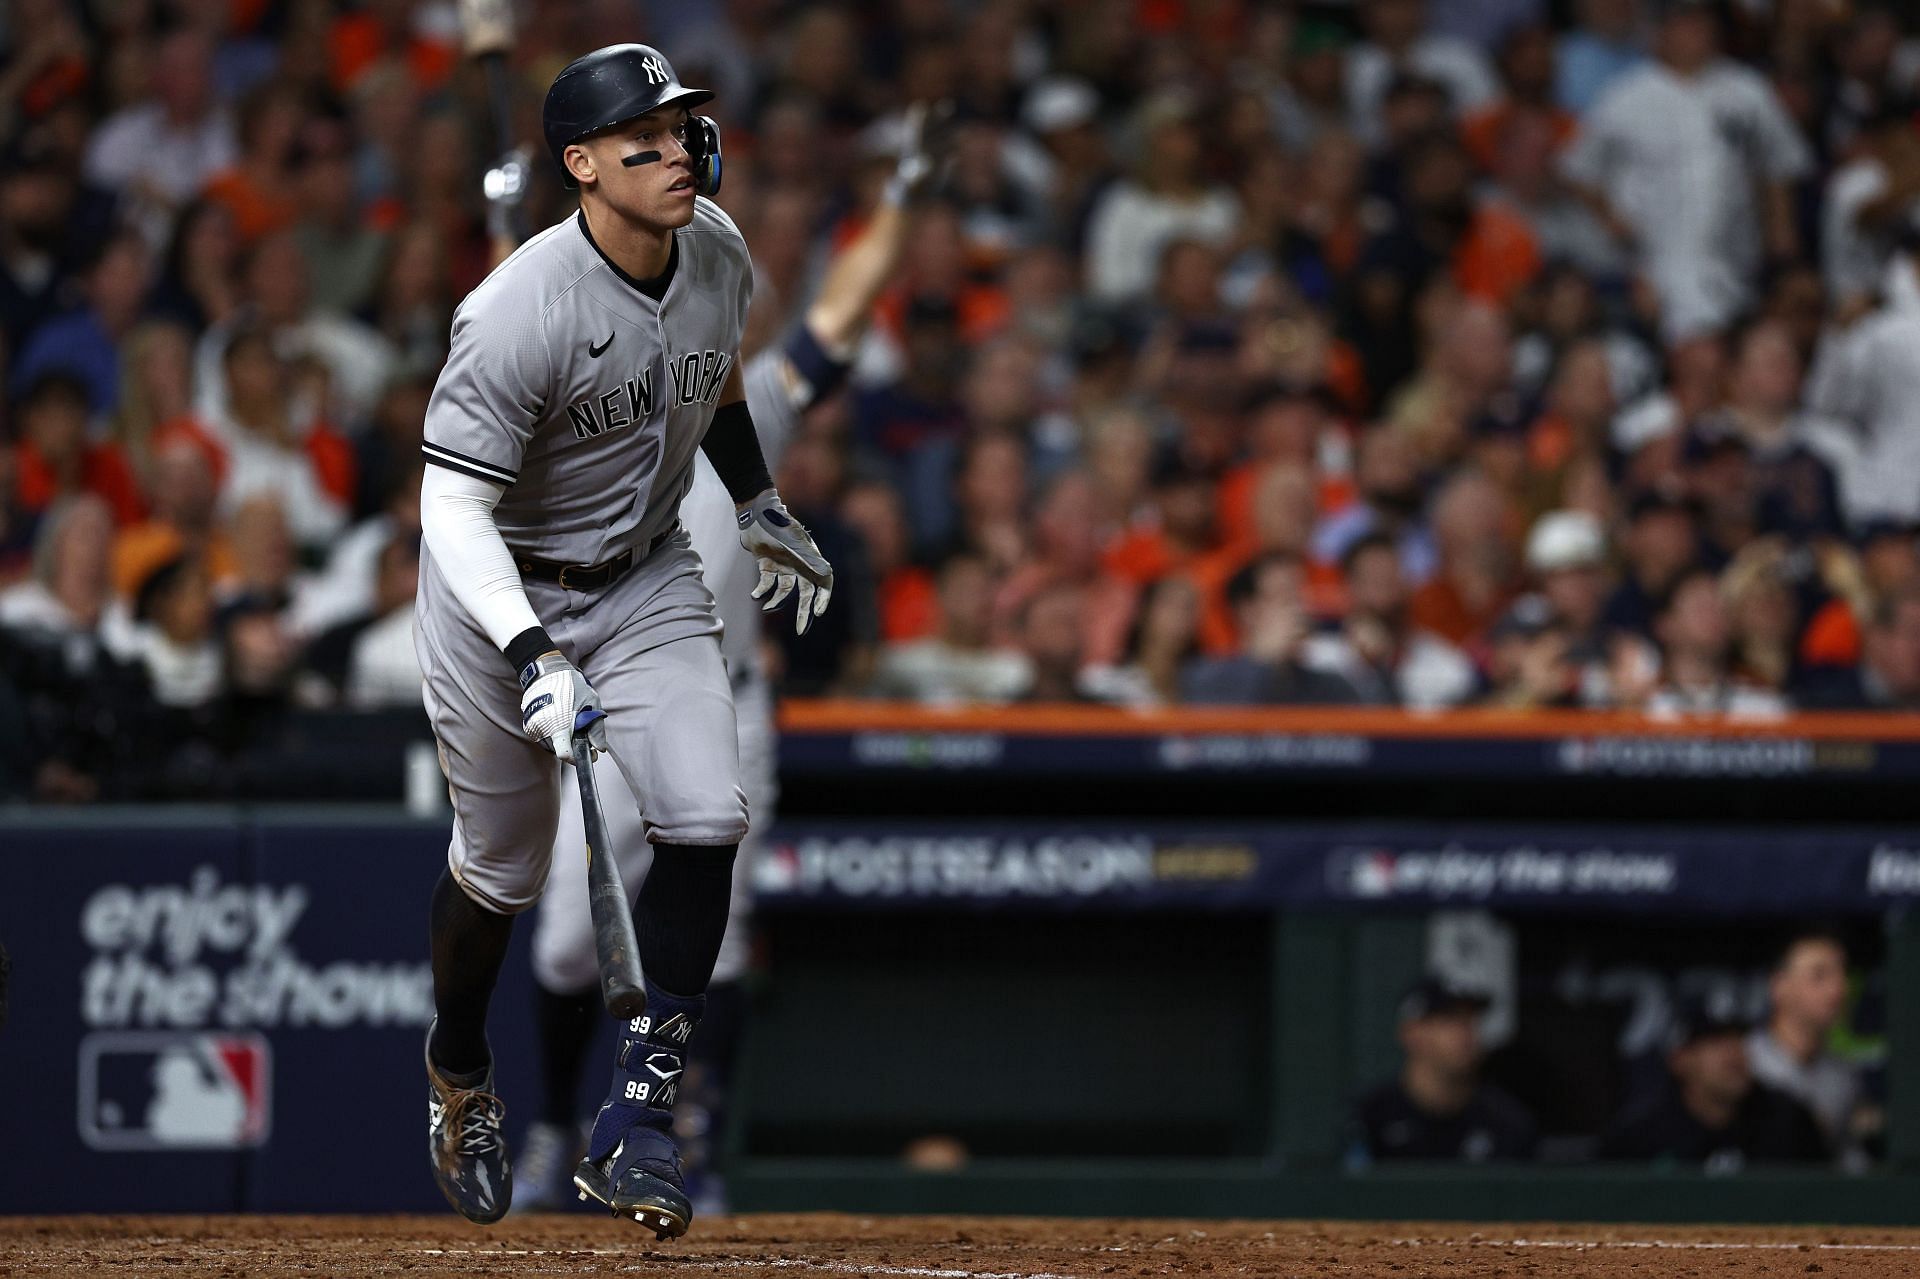 Aaron Judge is a favorite for the 2022 AL MVP ahead of Shohei Ohtani of the Angels